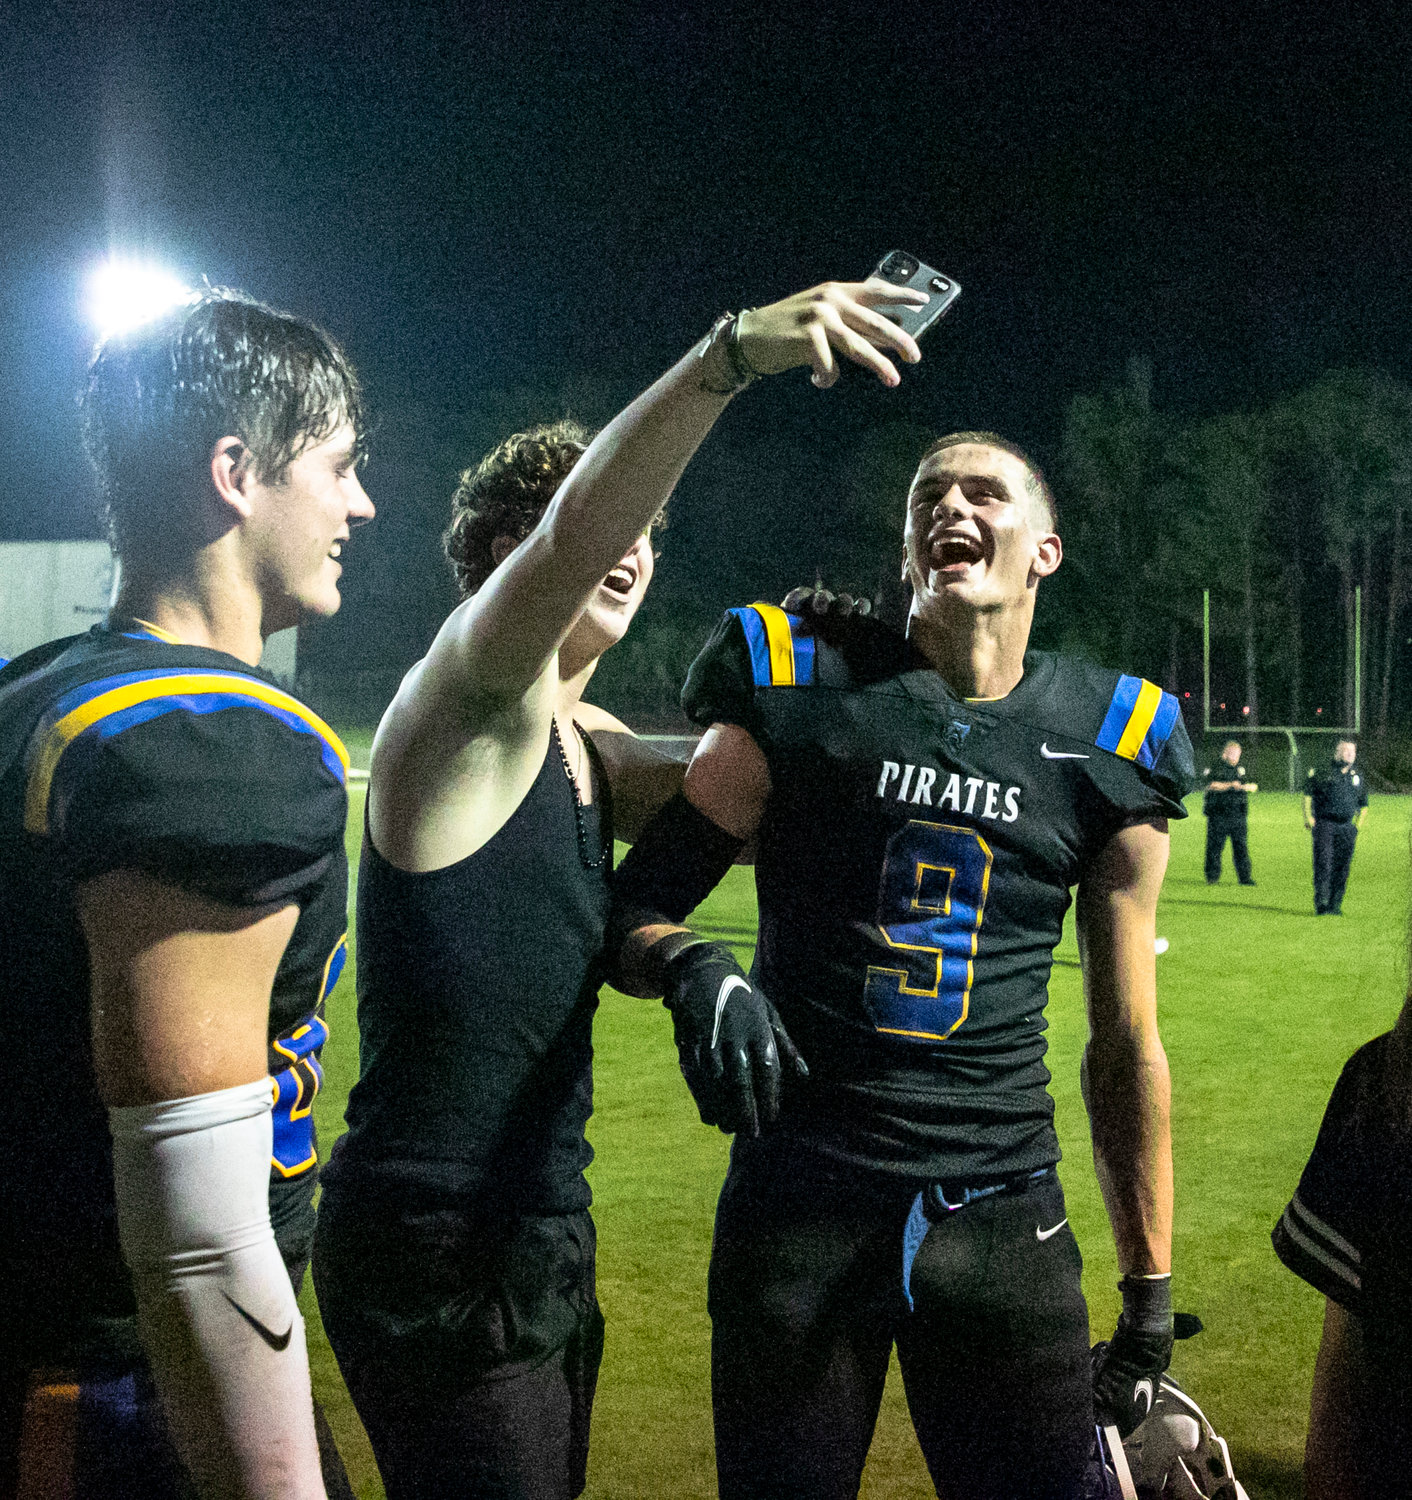 Fairhope didn’t have to wait long to celebrate its first win of the season after Nolan Phillips (9) recorded a game-winning interception he returned for a touchdown in the final seconds of the Pirates’ opening game Friday night at W. C. Majors Field.